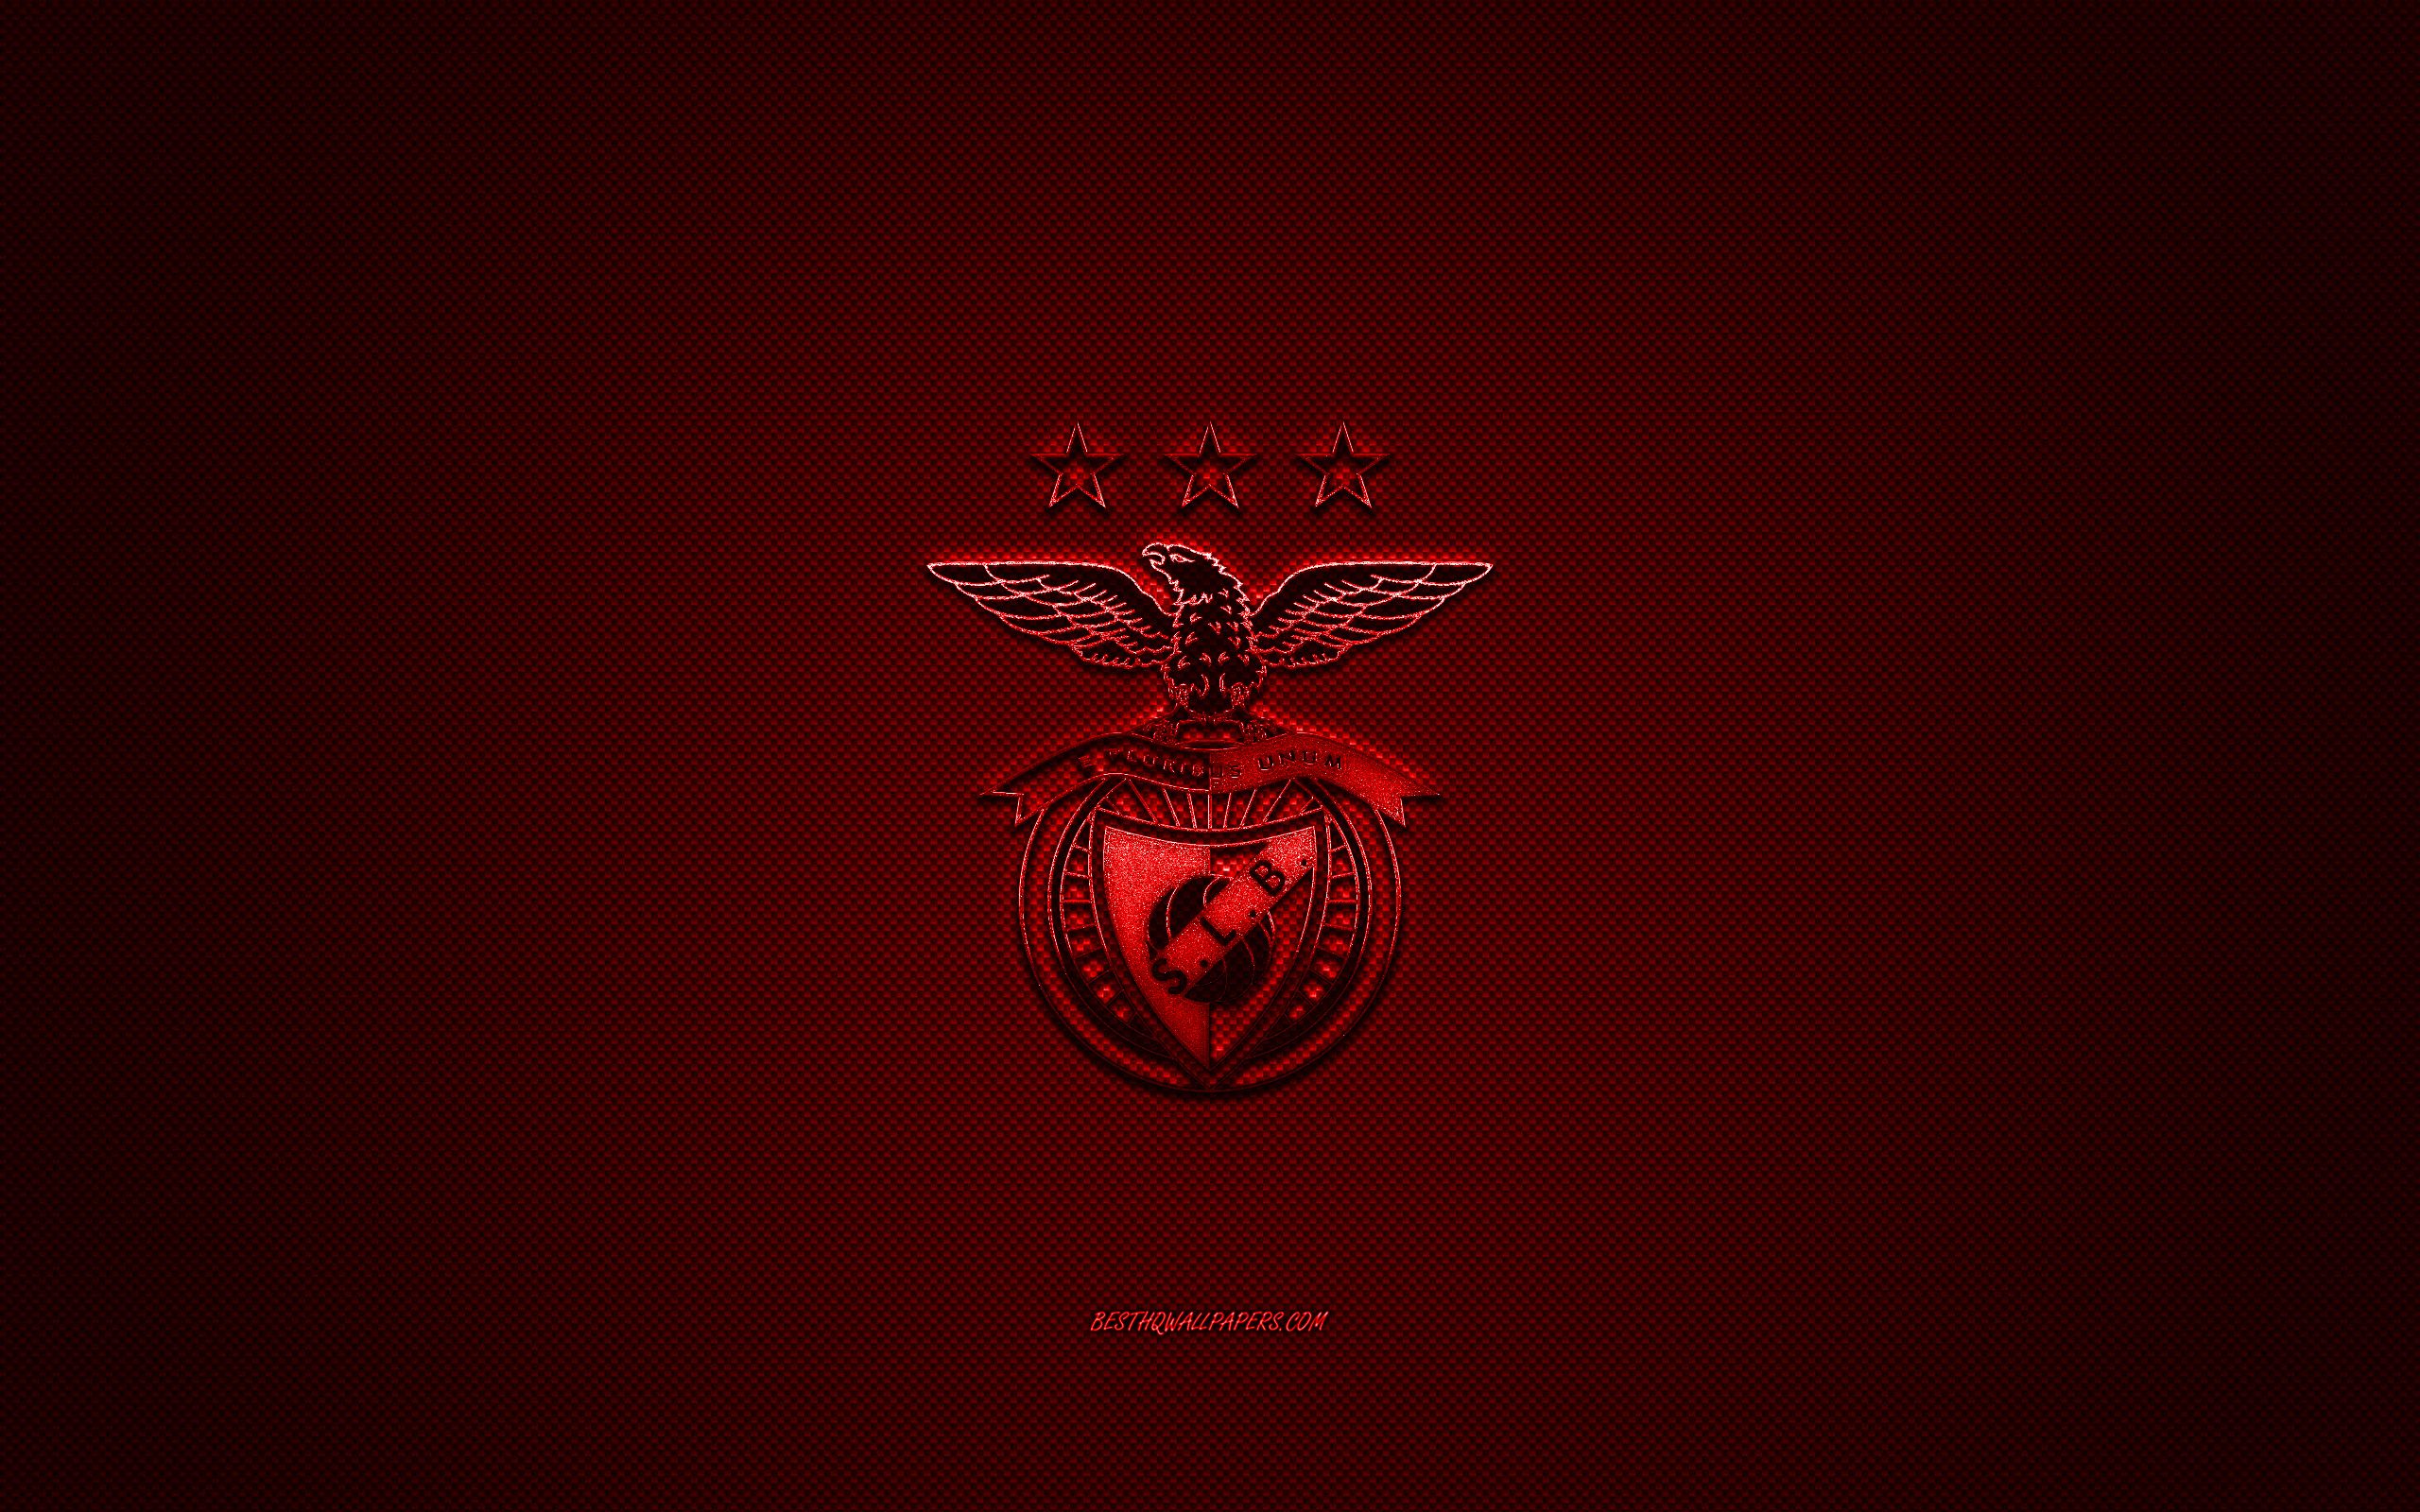 Download wallpaper SL Benfica, Portuguese football club, Primeira Liga, red logo, red carbon fiber background, football, Lisbon, Portugal, SL Benfica logo for desktop with resolution 2560x1600. High Quality HD picture wallpaper